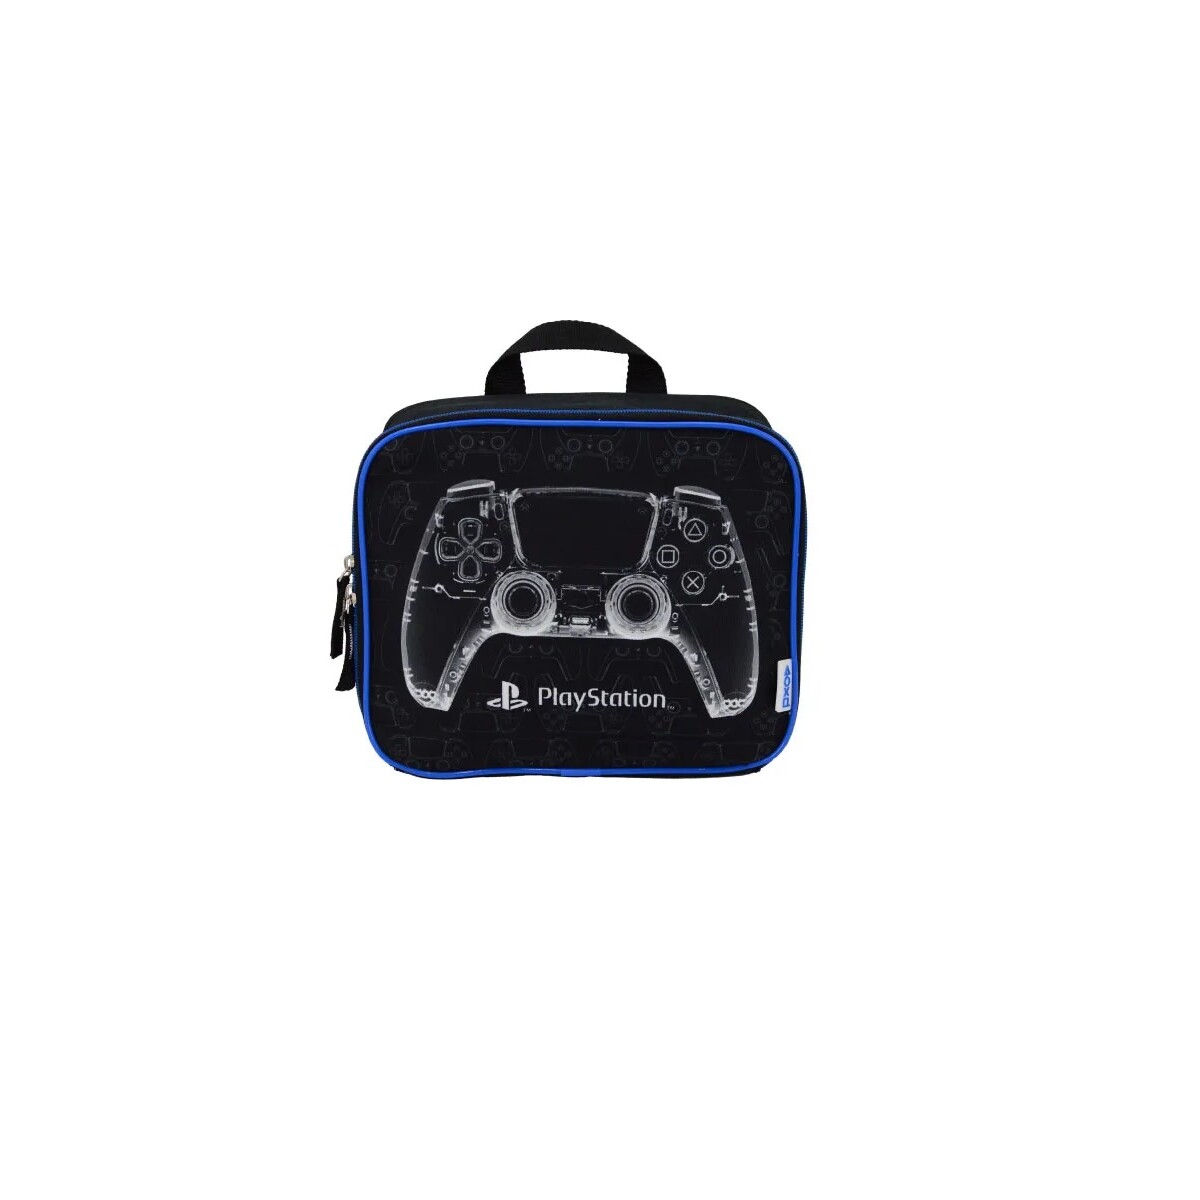 Playstation X-Ray Backpack Lunch Bag Único